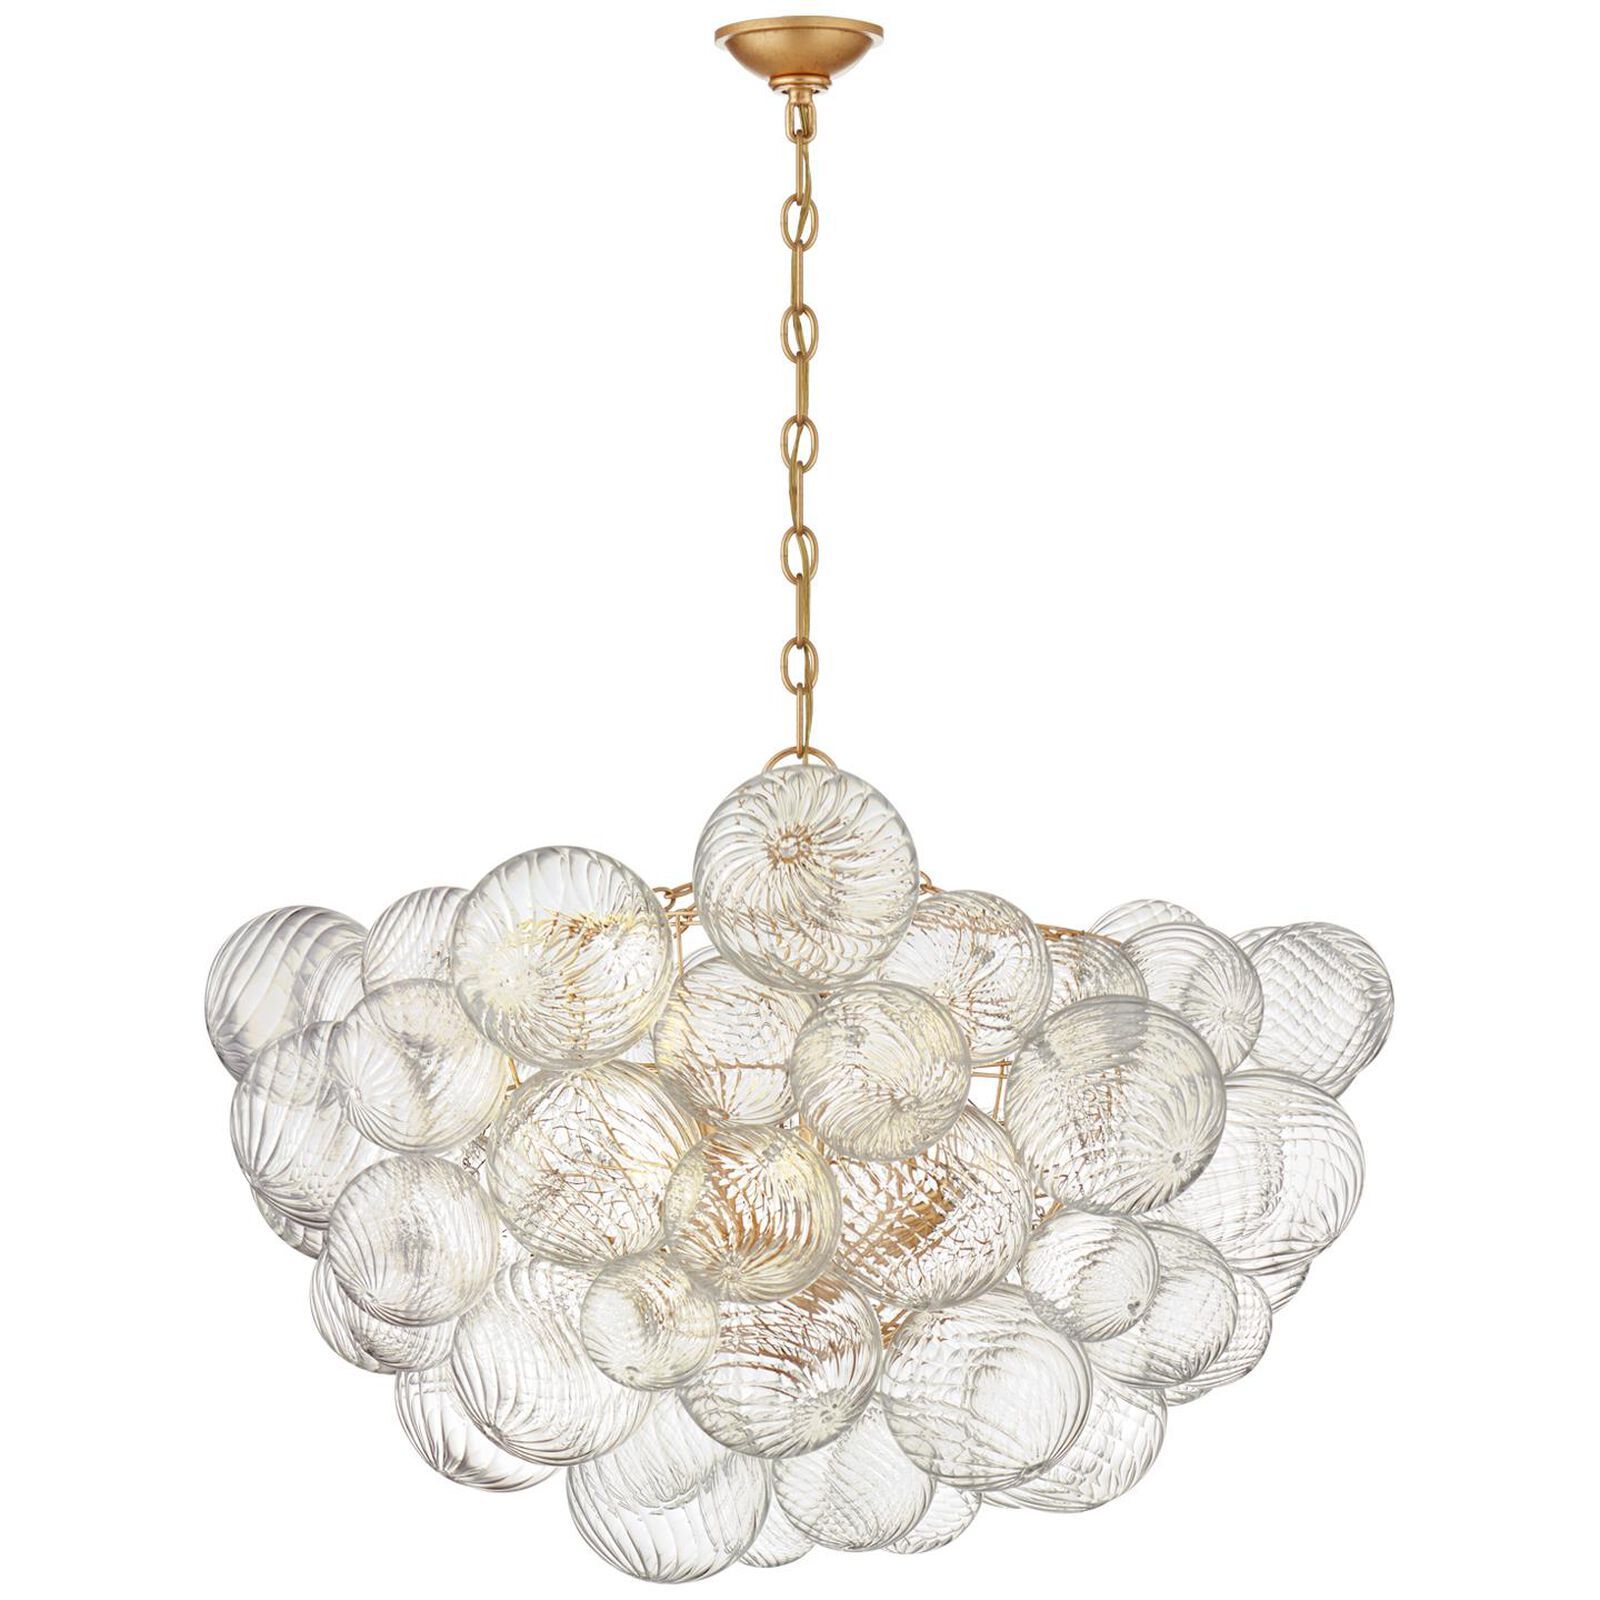 Julie Neill Talia 33 Inch 8 Light Chandelier by Visual Comfort and Co. | Capitol Lighting 1800lighting.com